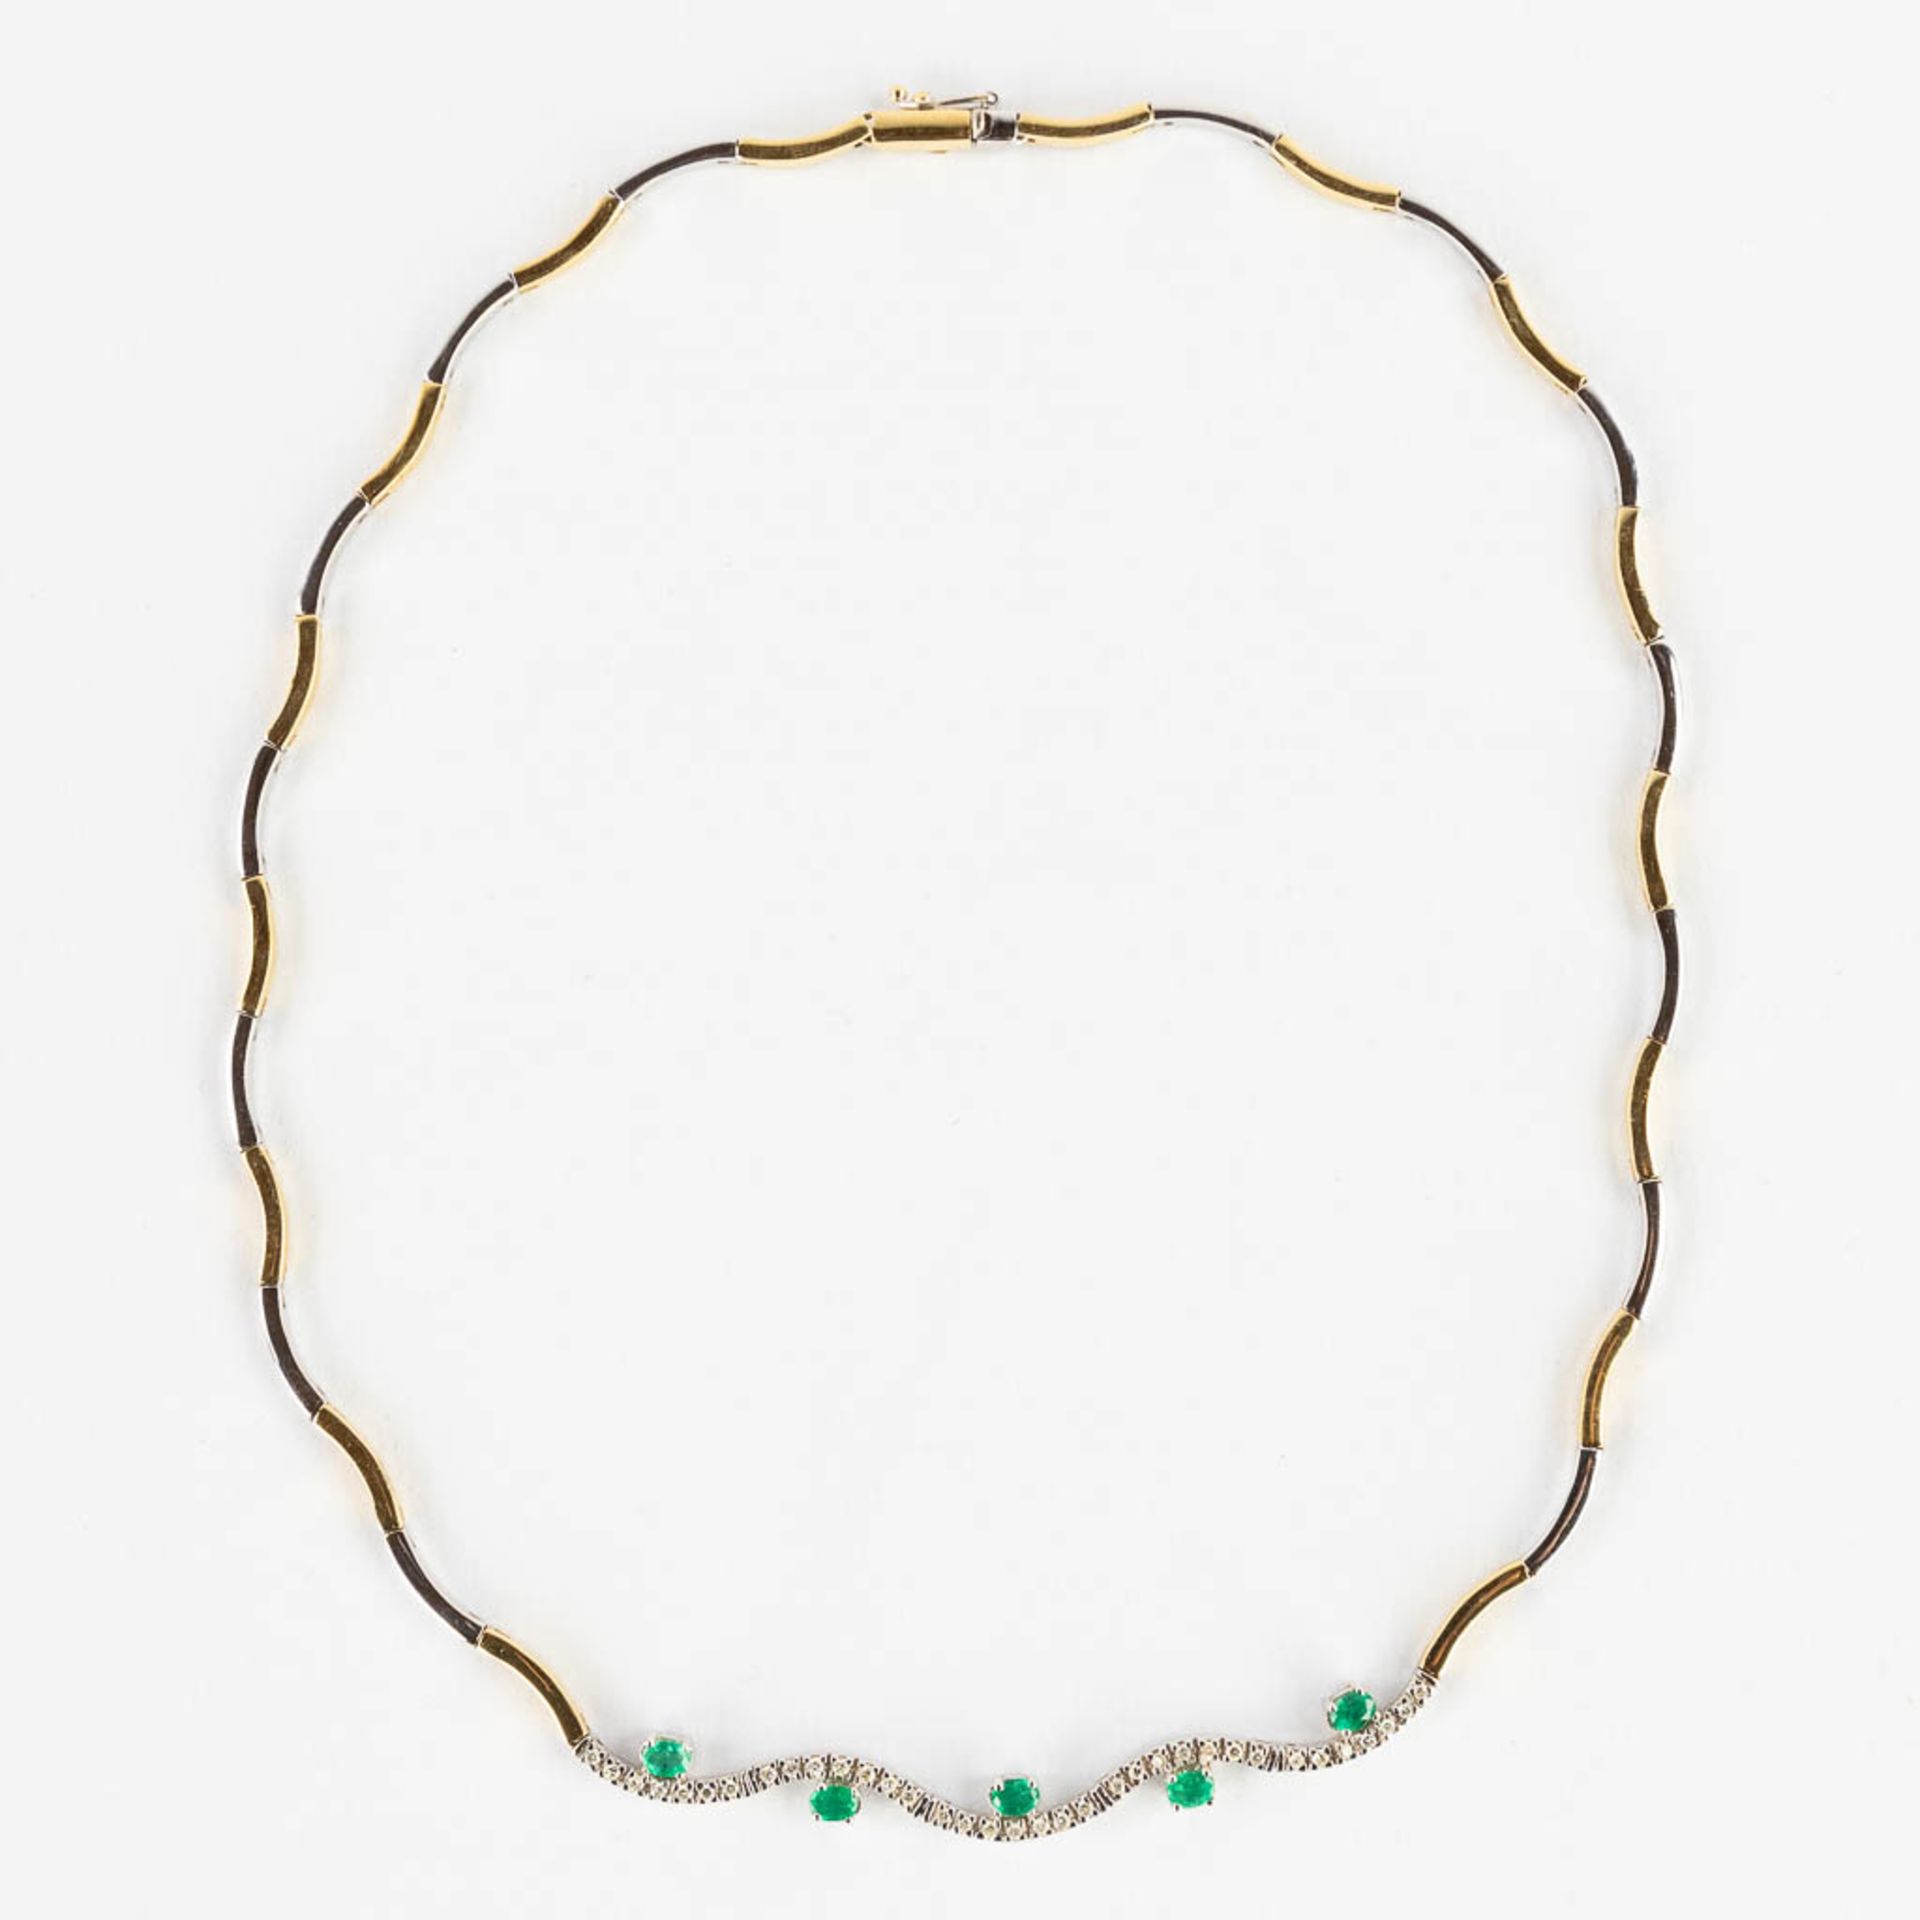 A necklace, 18 karats yellow and white gold, decorated with green, probably, emeralds. 24,67g. - Image 3 of 11